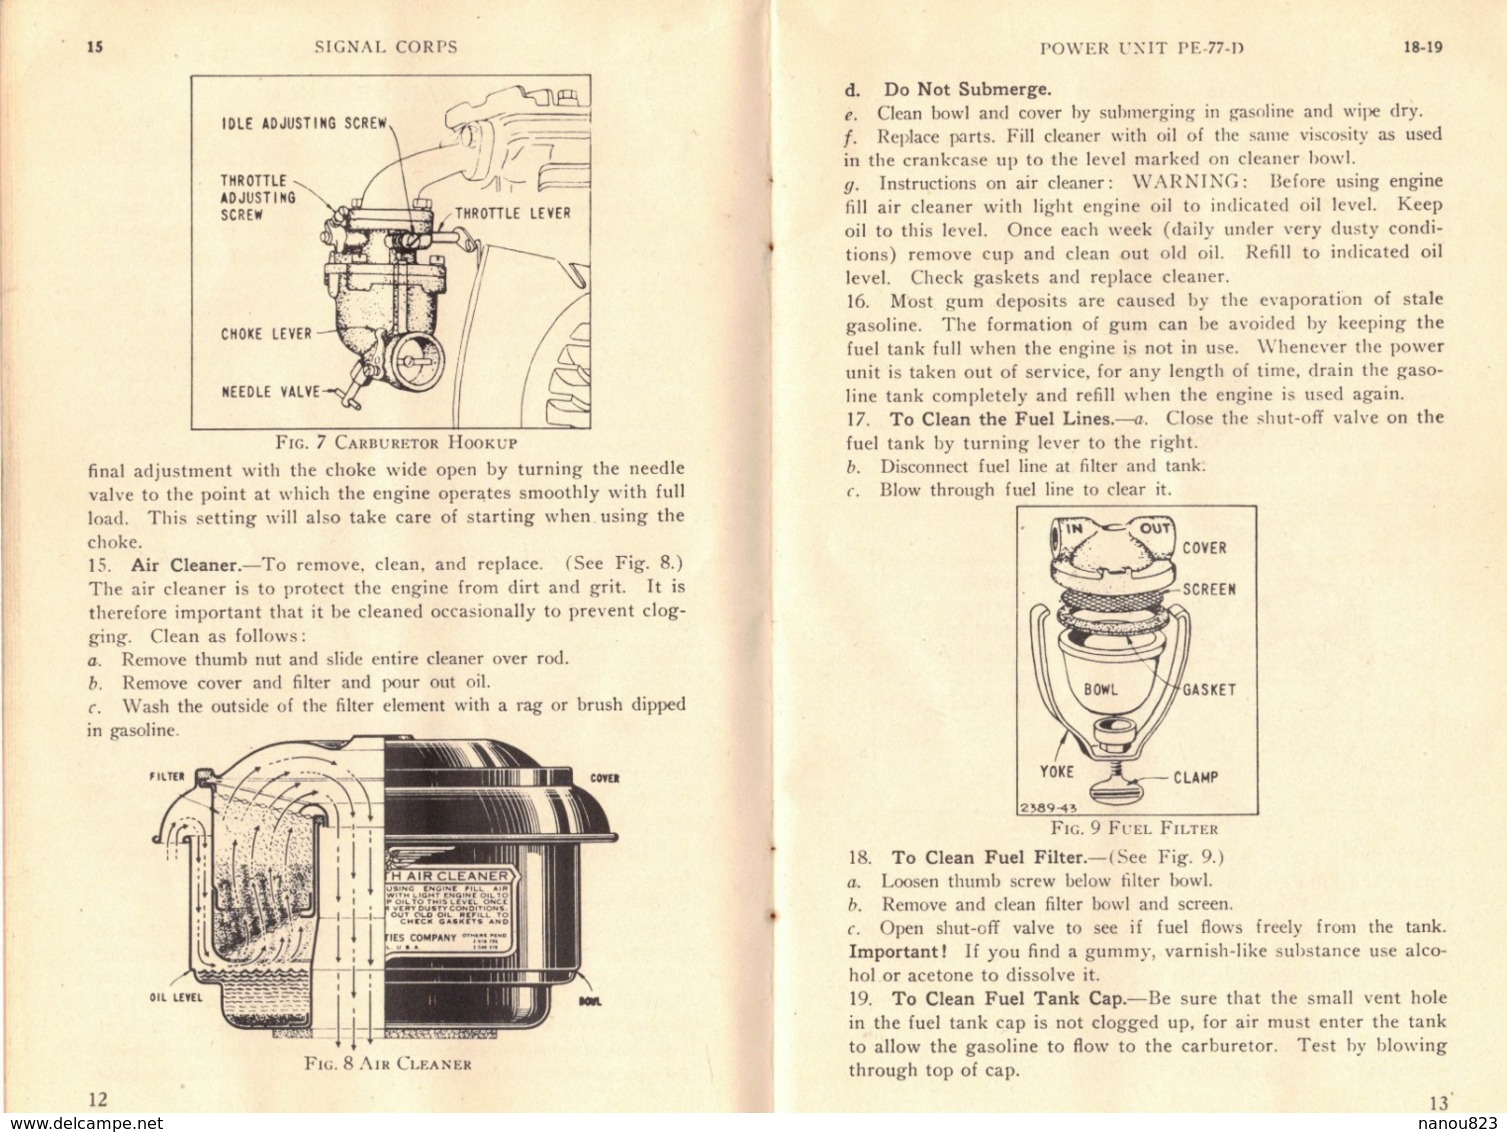 WASHINGTON OCTOBER 1943 WAR DEPARTMENT TECNICAL MANUAL POWER UNIT PE 77 D PUBLISHED BY CLIMAX ENGINEERING